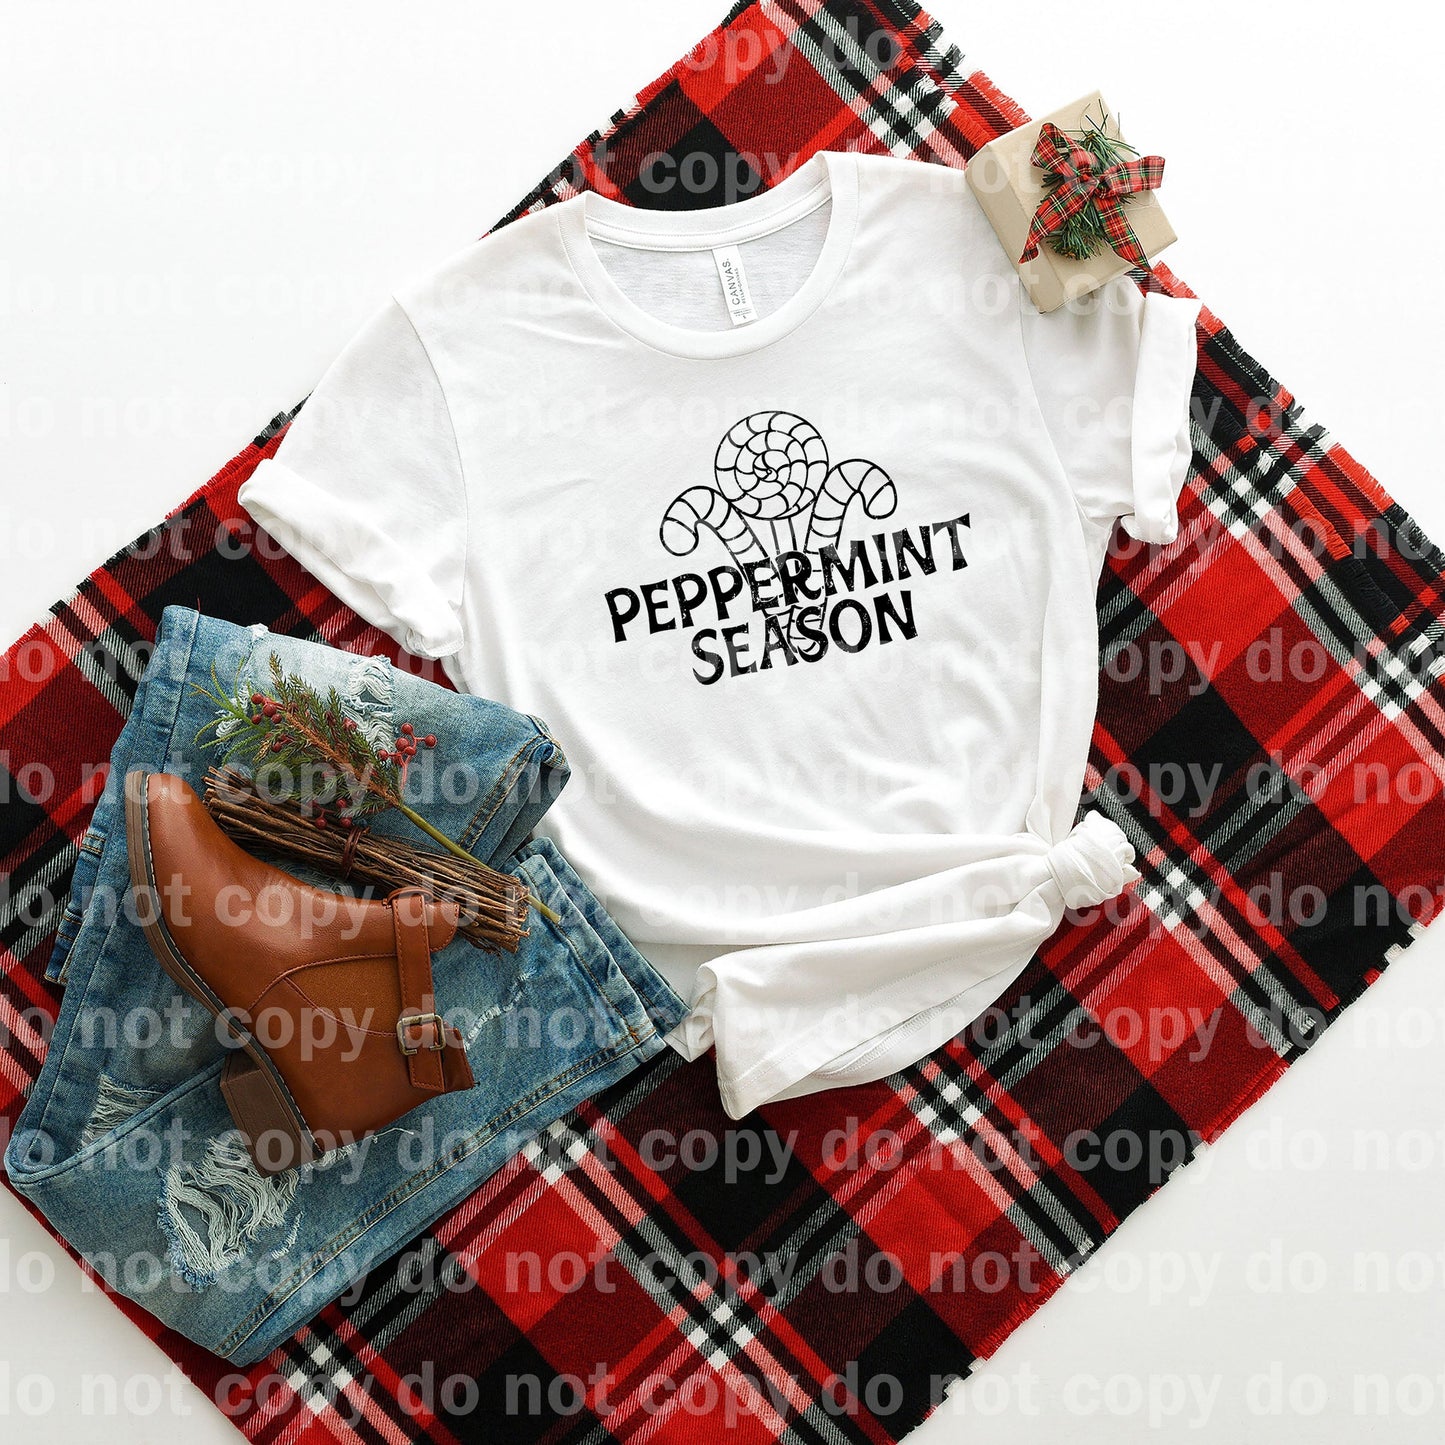 Peppermint Season Distressed Dream Print or Sublimation Print